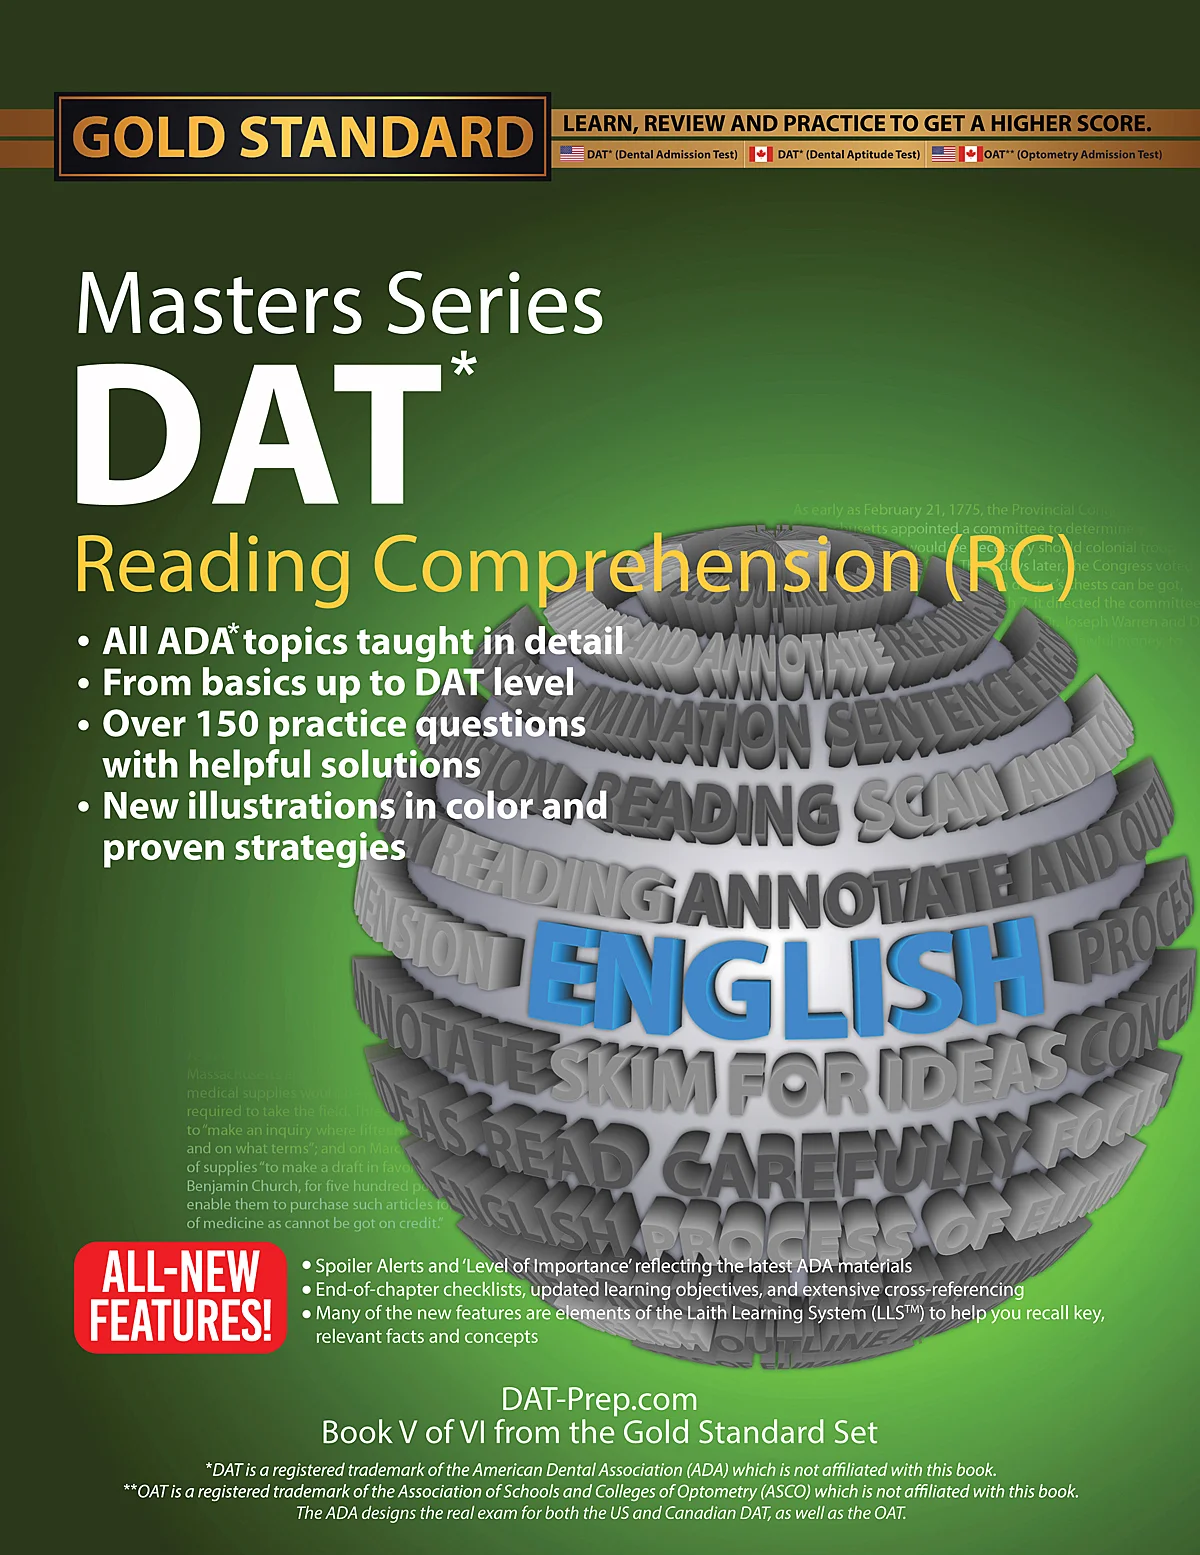 DAT Masters Series Reading Comprehension (RC)